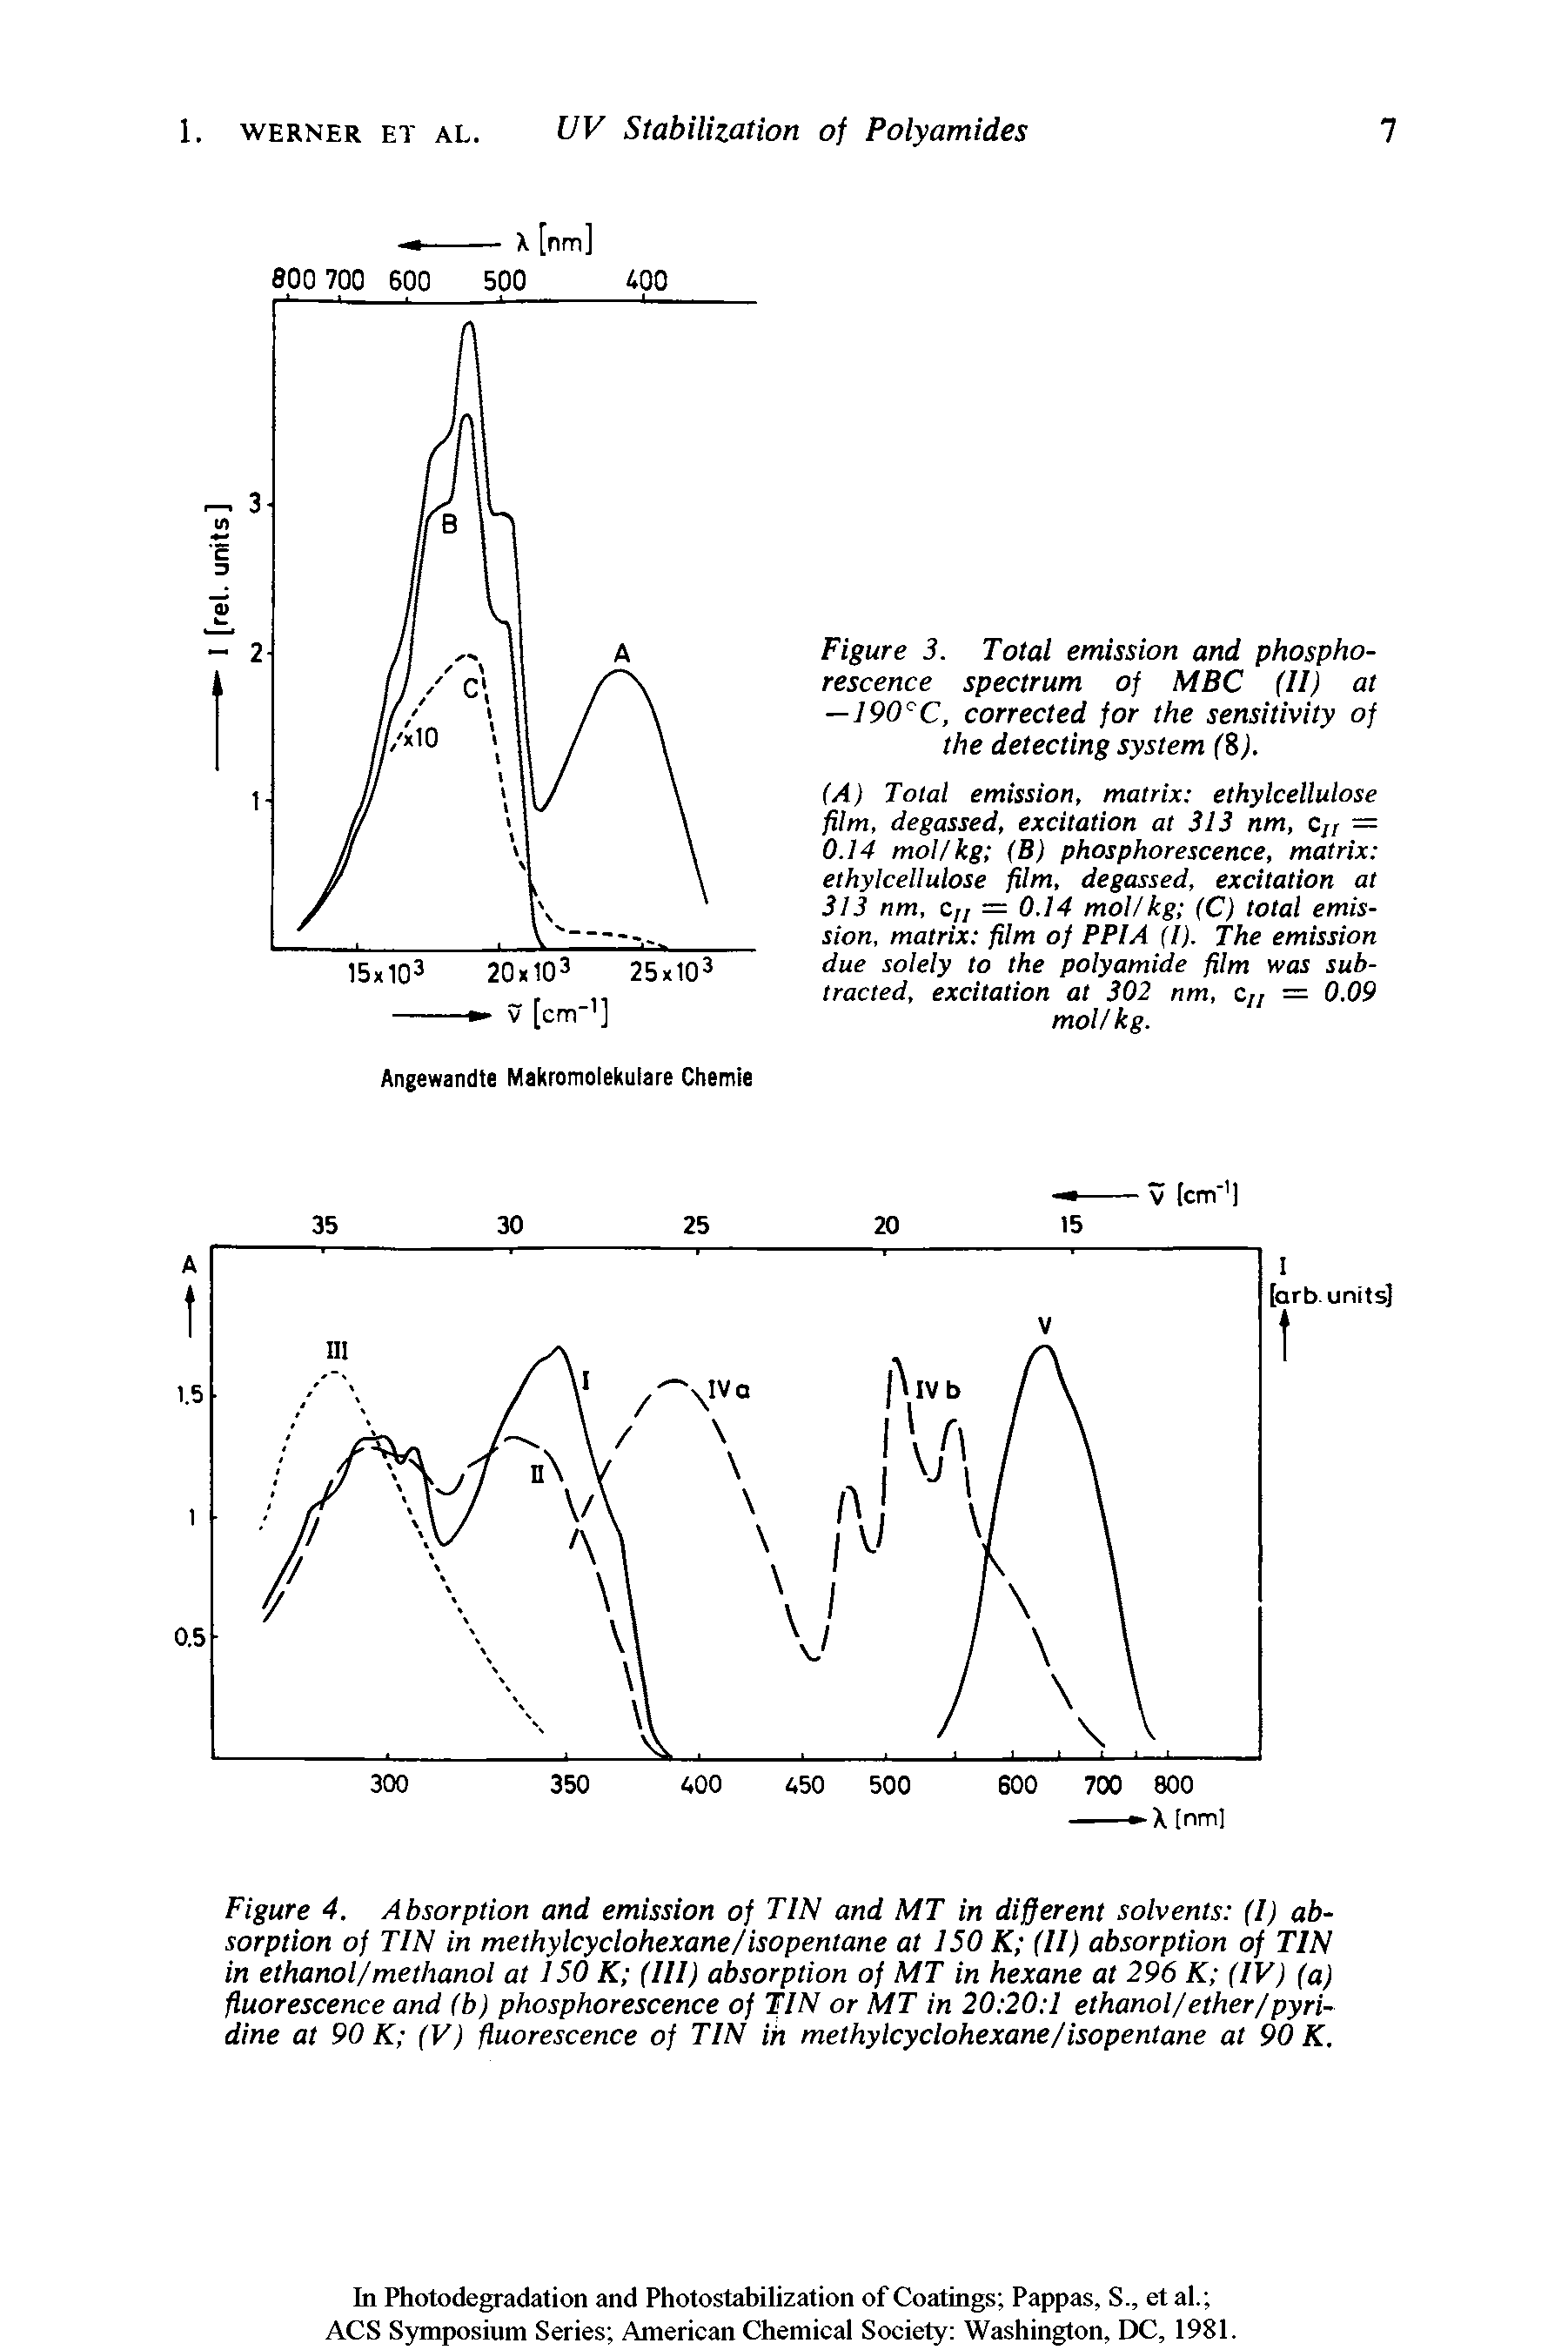 Figure 4. Absorption and emission of TIN and MT in different solvents (I) absorption of TIN in methylcyclohexane/isopentane at 150 K (II) absorption of TIN in ethanol/methanol at 150 K (III) absorption of MT in hexane at 296 K (IV) (a) fluorescence and (b) phosphorescence of TIN or MT in 20 20 1 ethanol/ether/pyridine at 90 K (V) fluorescence of TIN in methylcyclohexane/isopentane at 90 K.